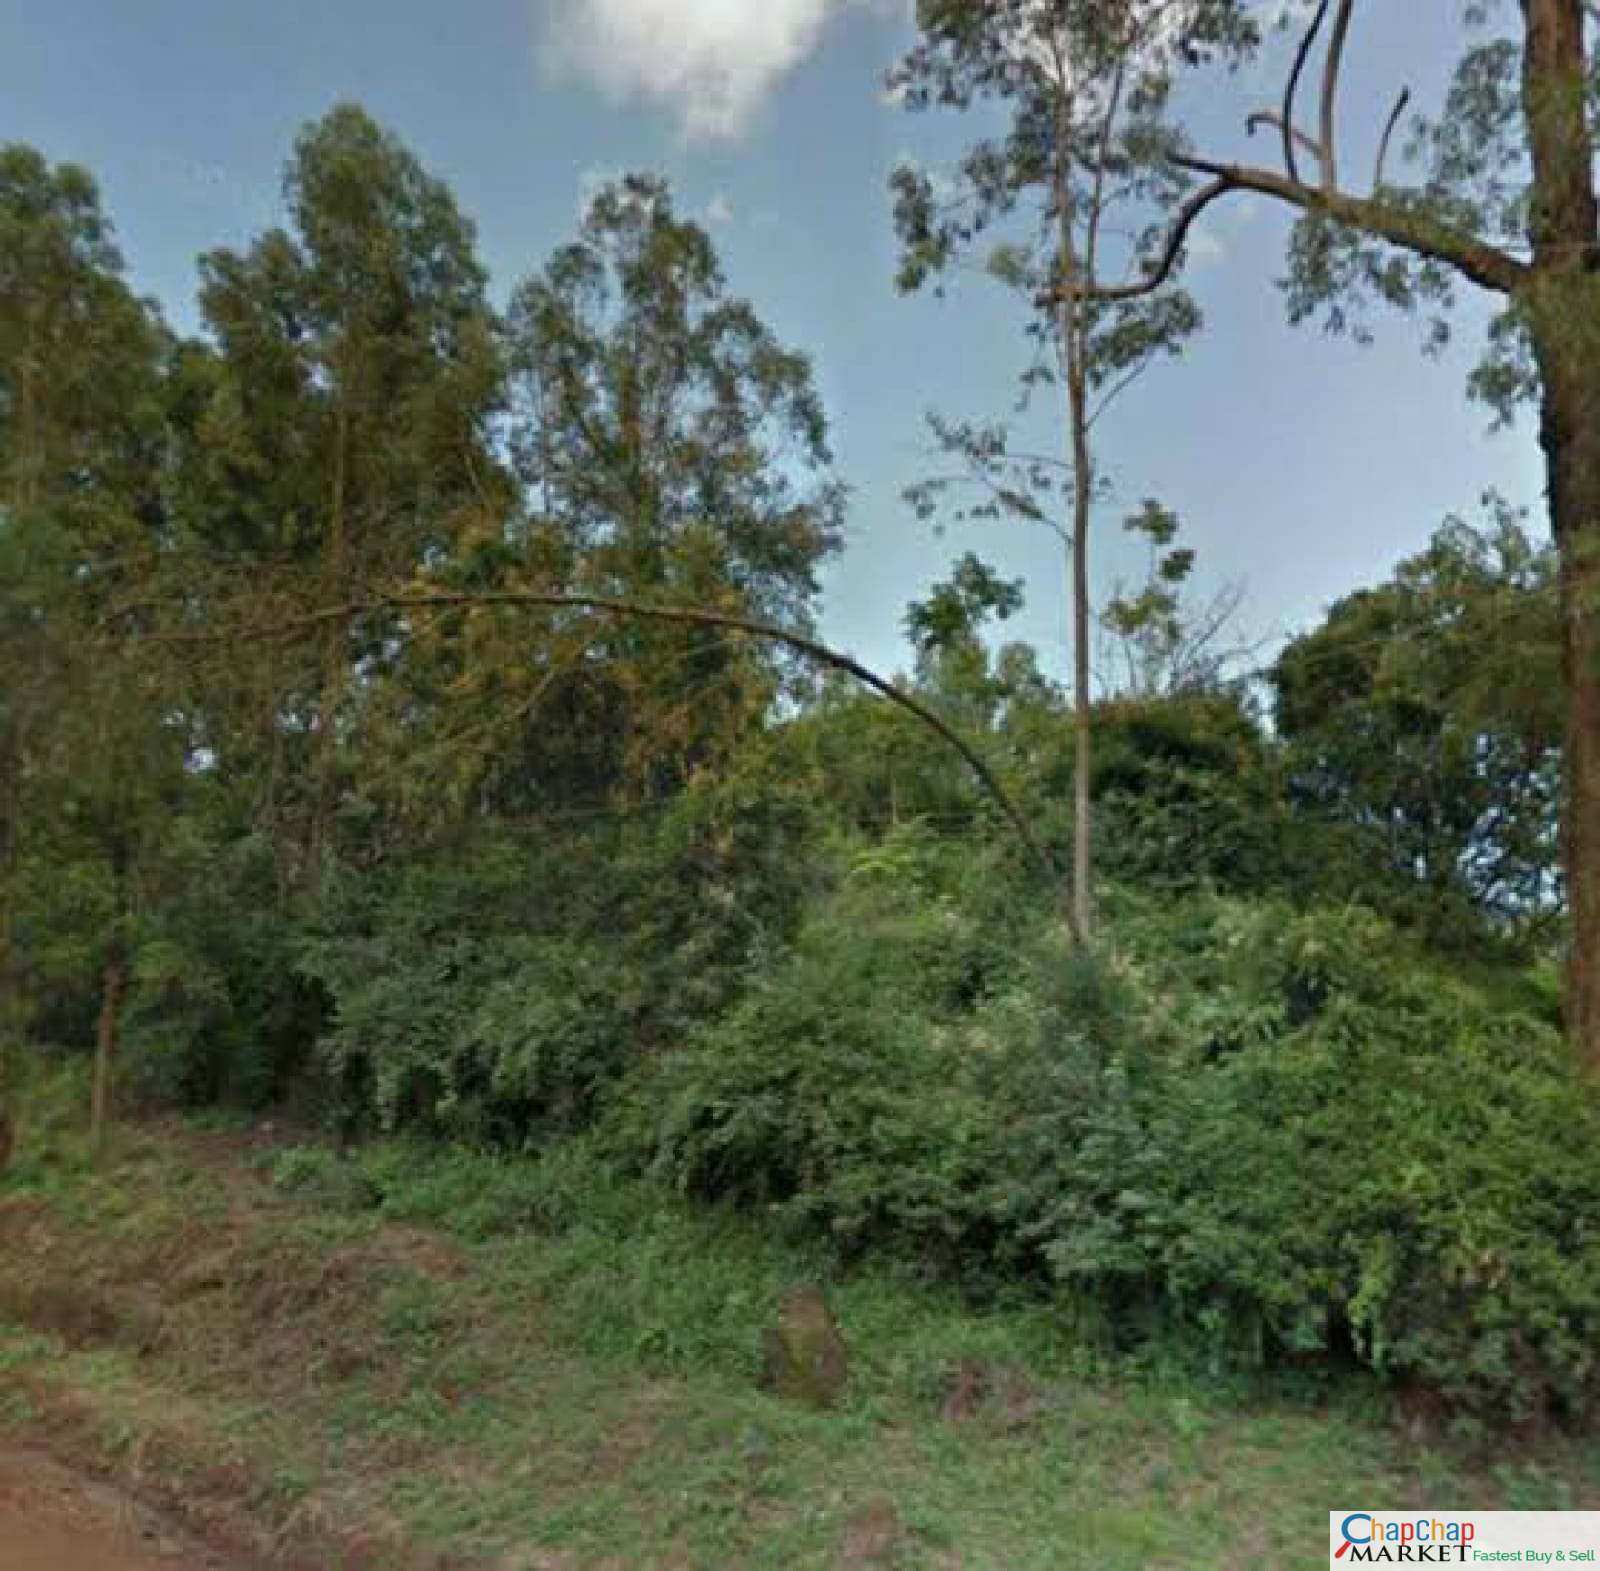 Real Estate Land For Sale-List of 100 Land For Sale In Karen Kenya Ready Clean Title Deed, House For Sale and Rent BEST PRICES acre Acres 30